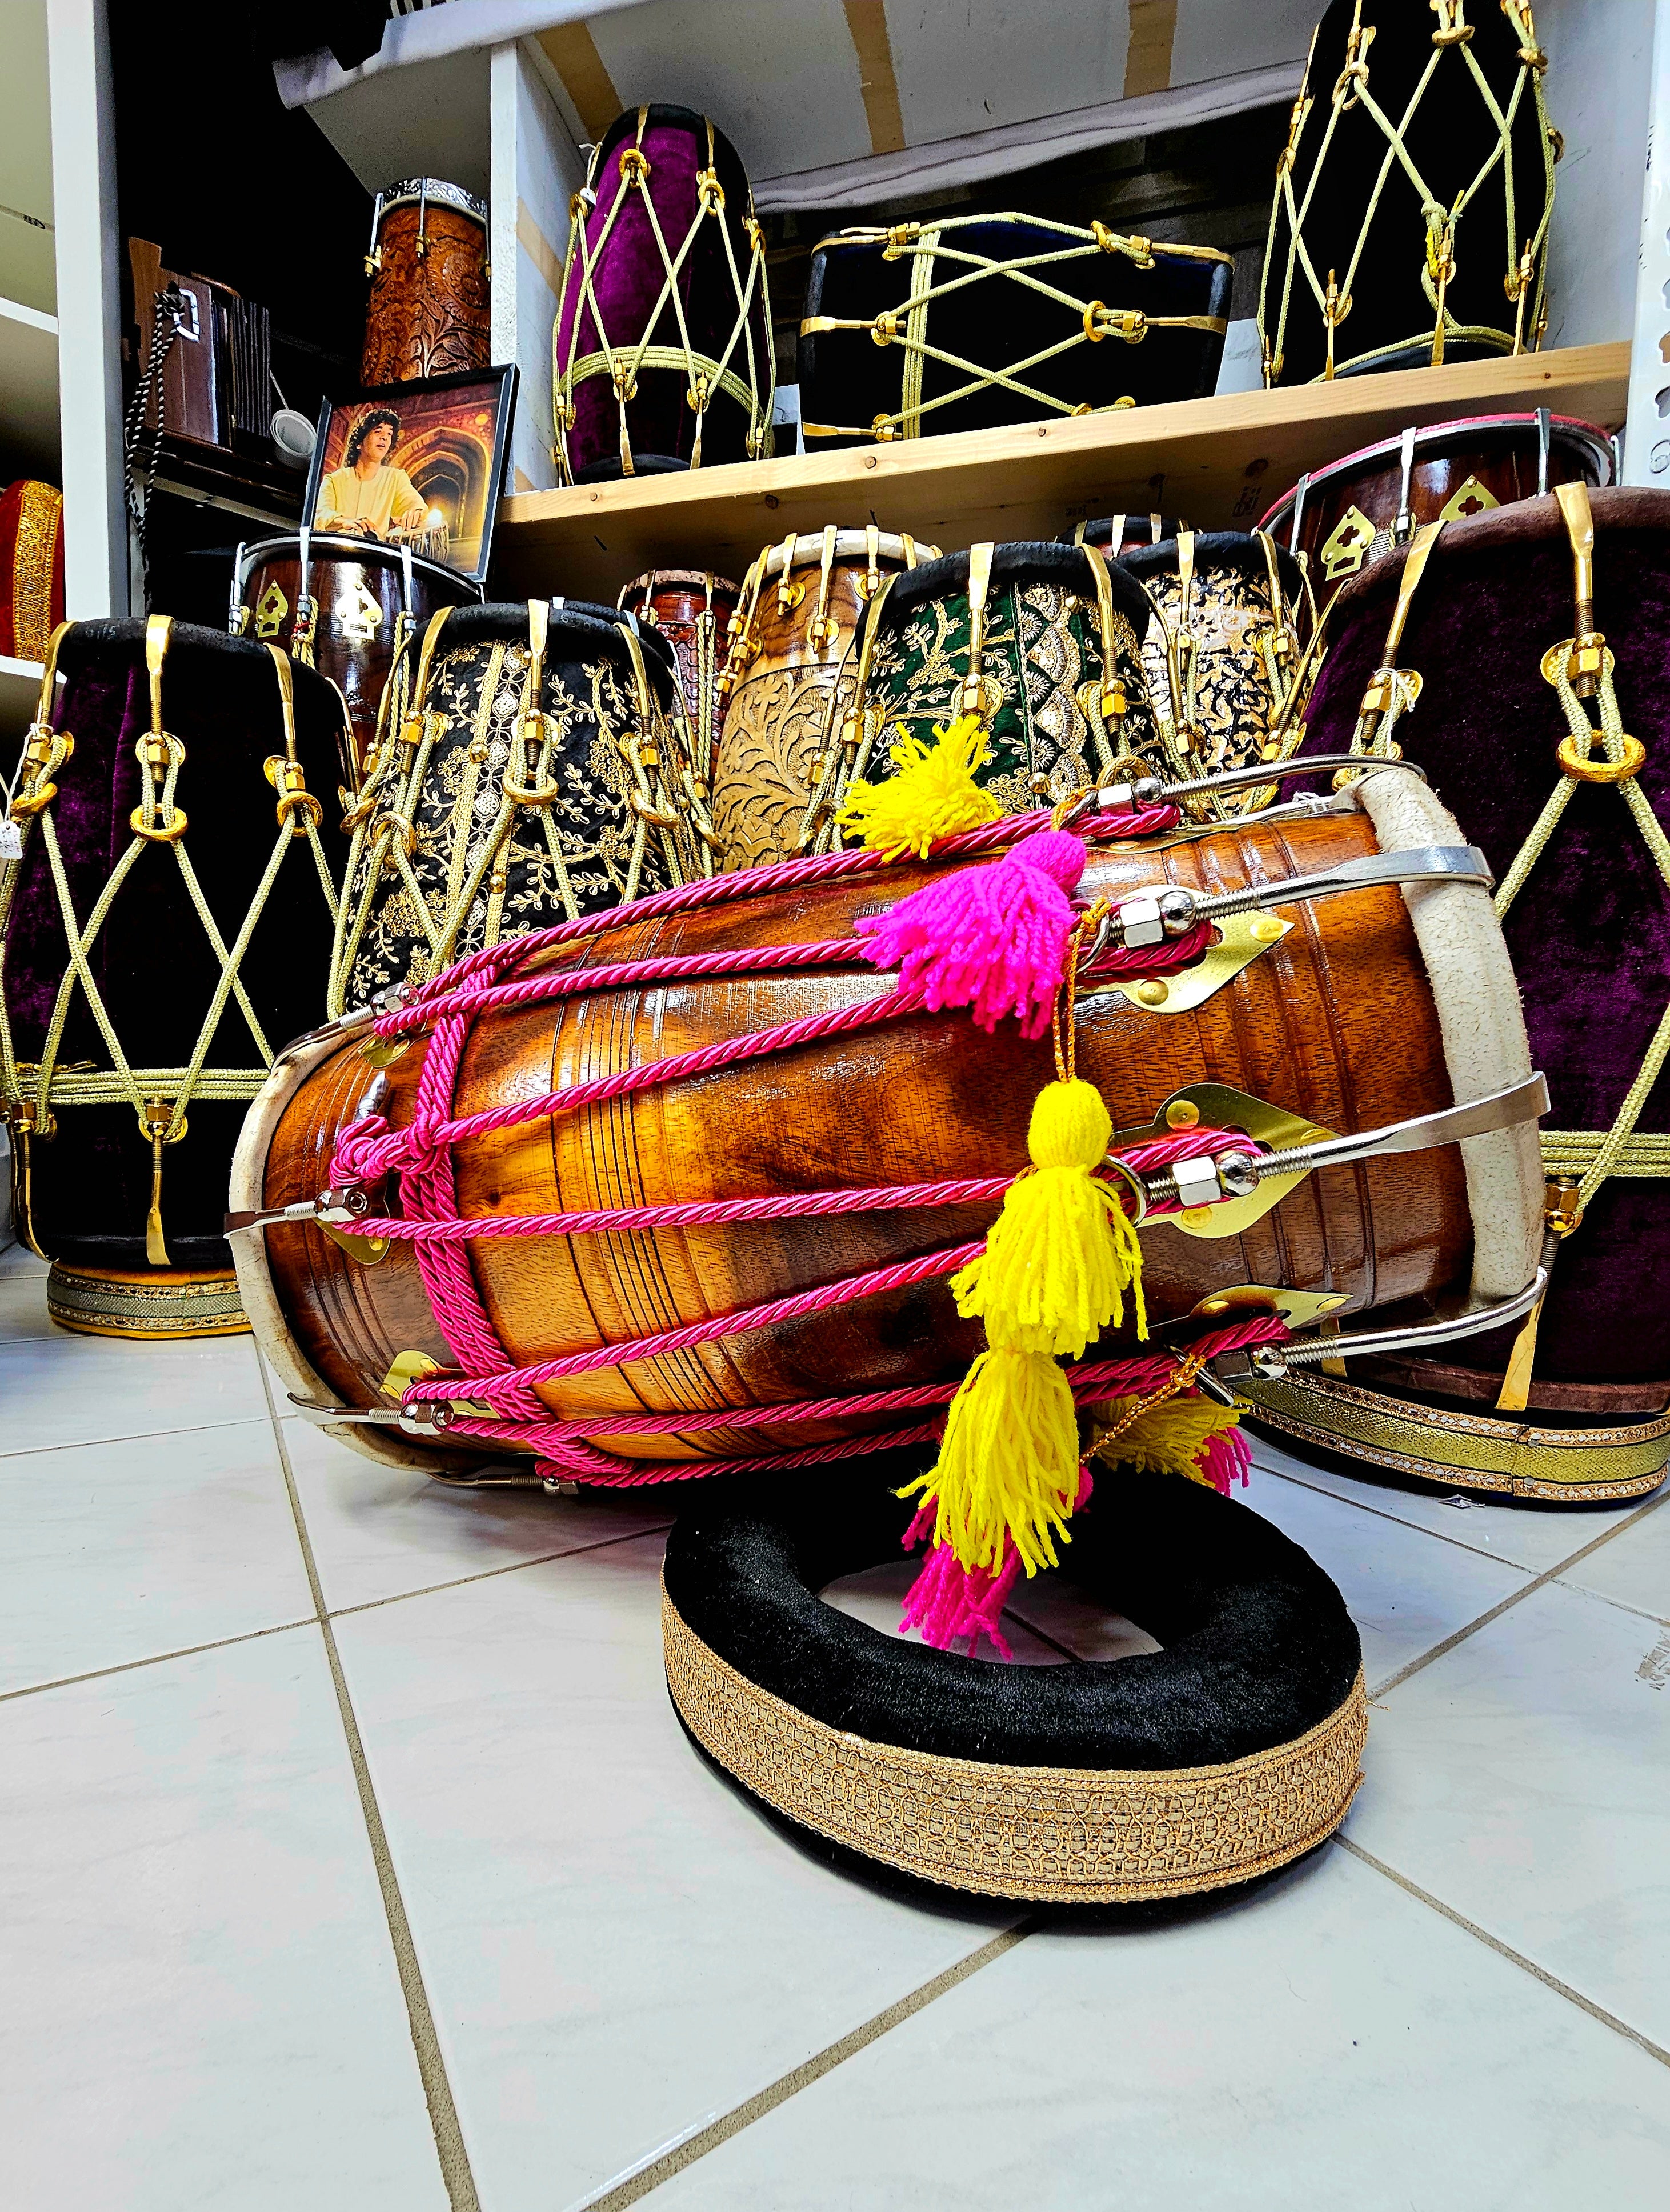 Vibrant Harmony: Glossy 2-Tone Red Sheesham Dholak with Chrome Bolts, Pink Ropes Design, and Playful Pink & Yellow Tassels